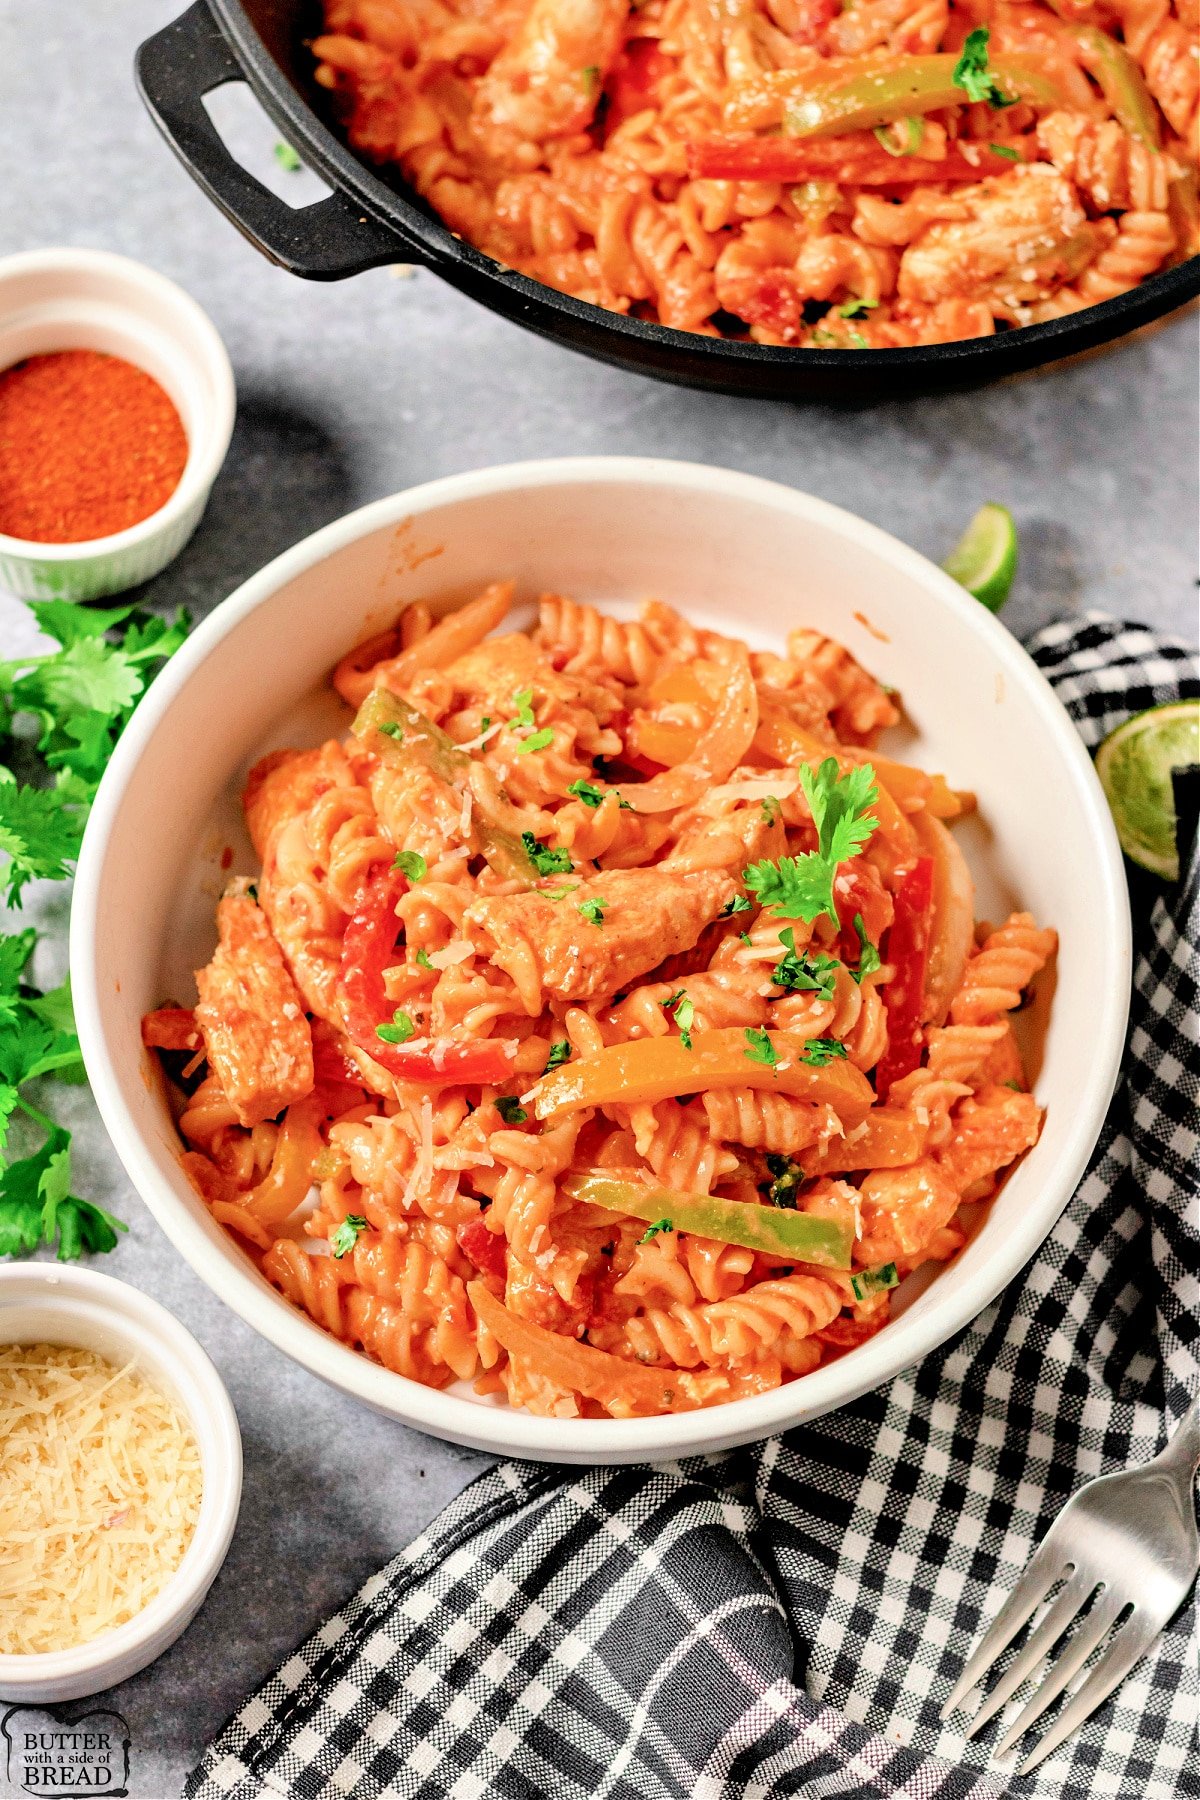 Chicken Fajita Pasta is creamy and loaded with flavor! Delicious one pot pasta recipe made with onions, peppers, cheese and chicken.